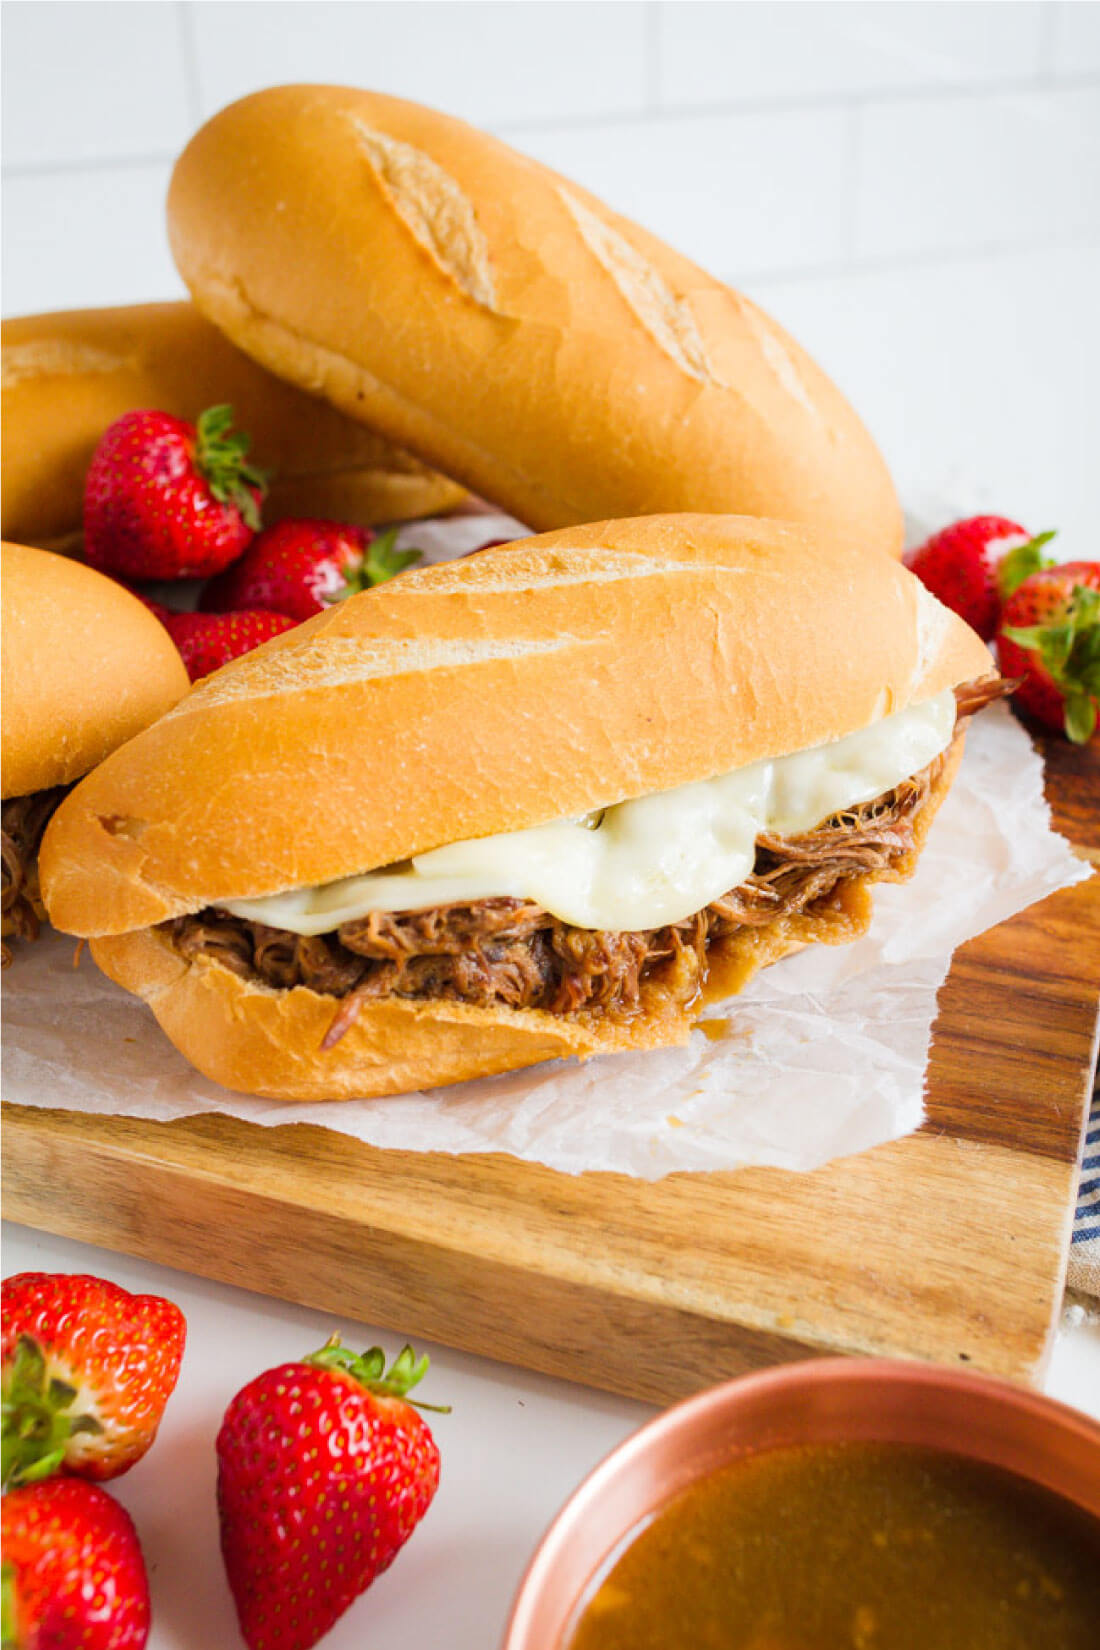 French Dip sandwiches with au jus sauce is the perfect comfort food that can be made in the slow cooker. www.thirtyhandmadedays.com